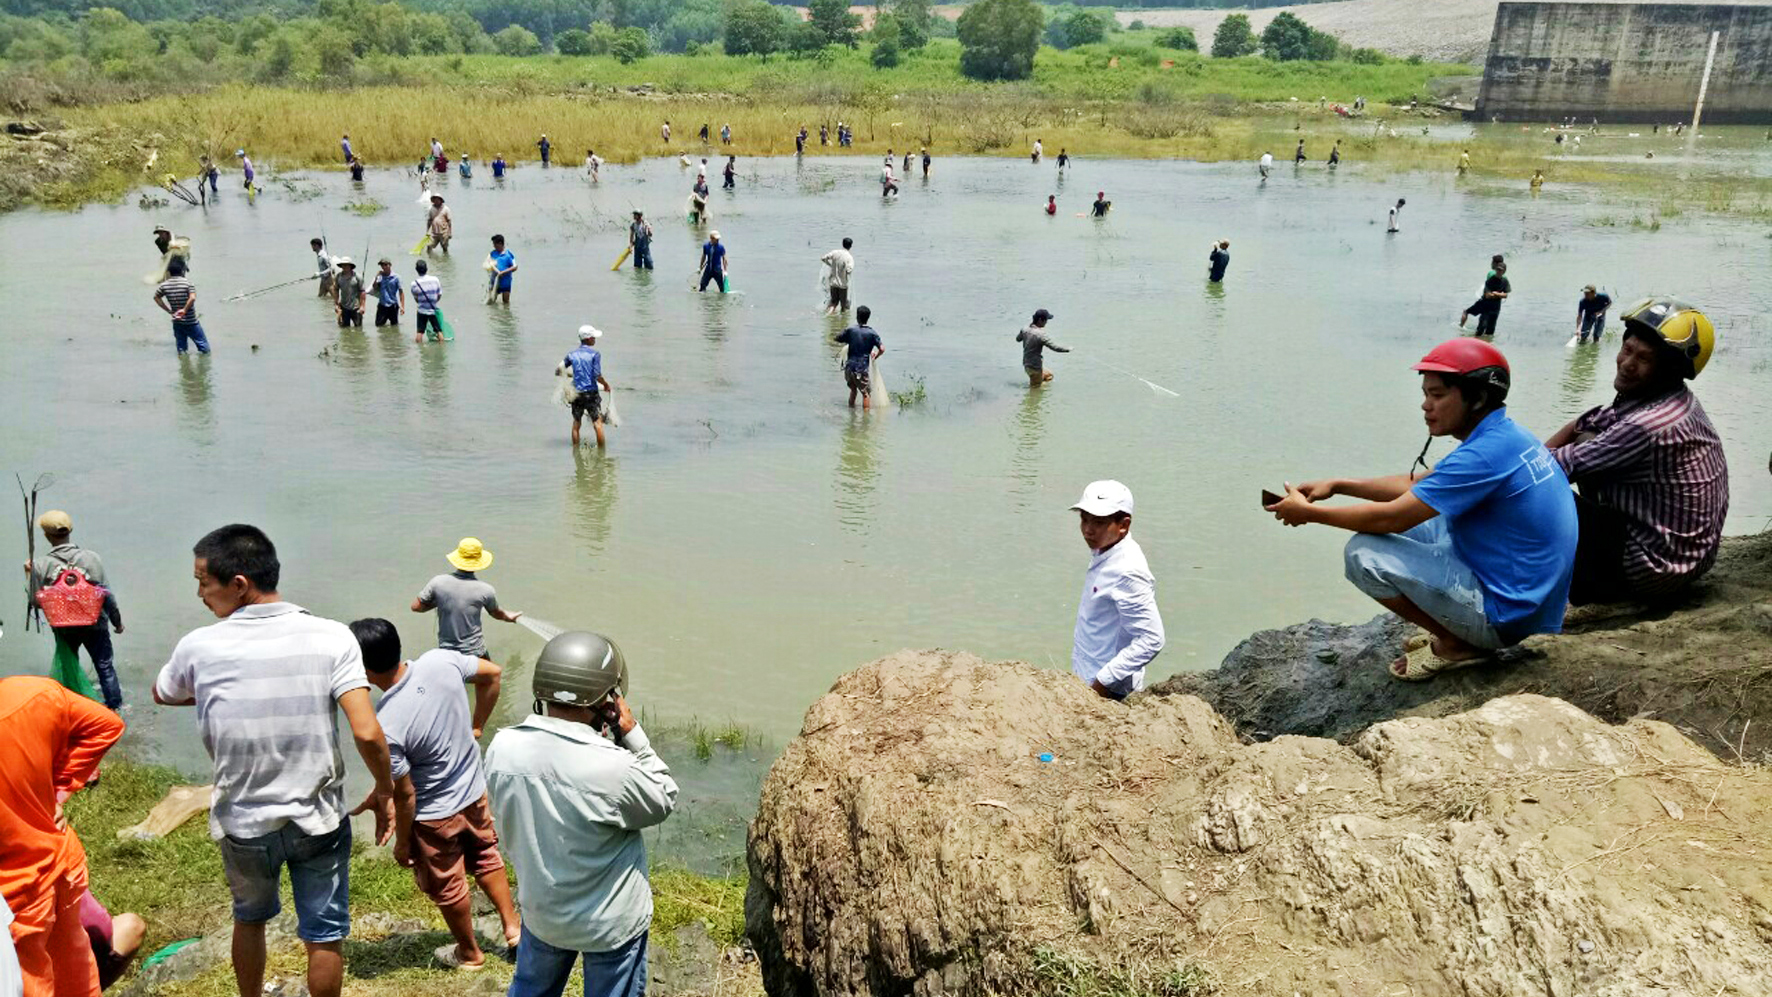 Hundreds of people catch fish after the Tri An Hydroelectric plant finishes releasing water on September 5, 2017. Photo: Tuoi Tre